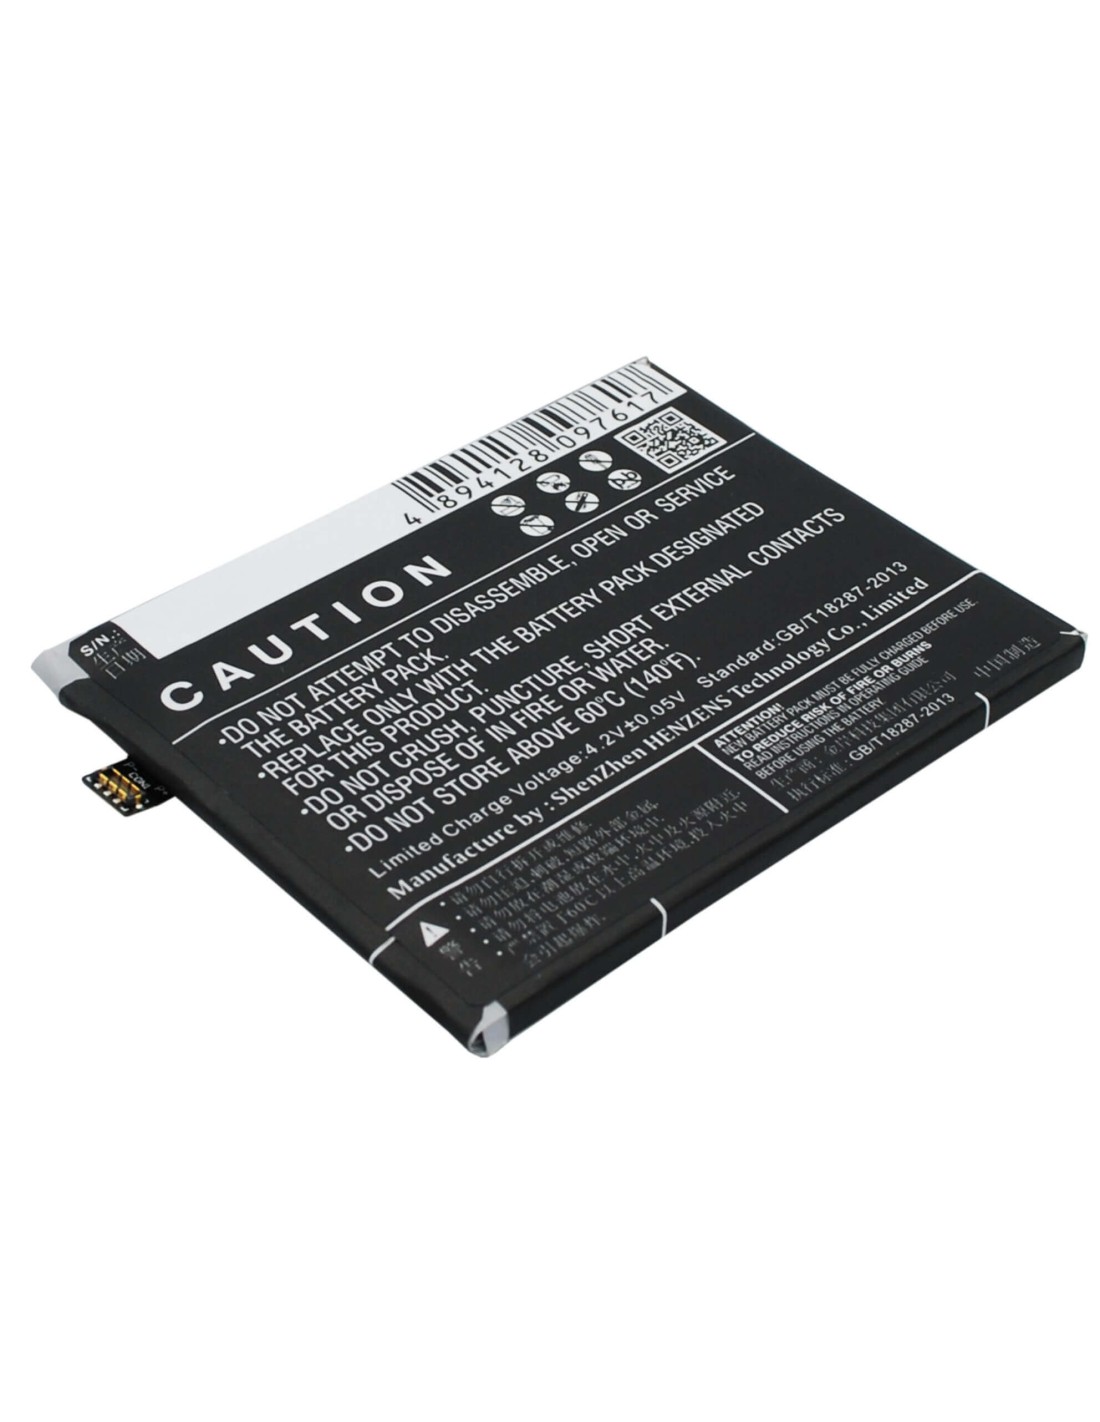 Battery for MeiZu M1, Note 3.8V, 3100mAh - 11.78Wh